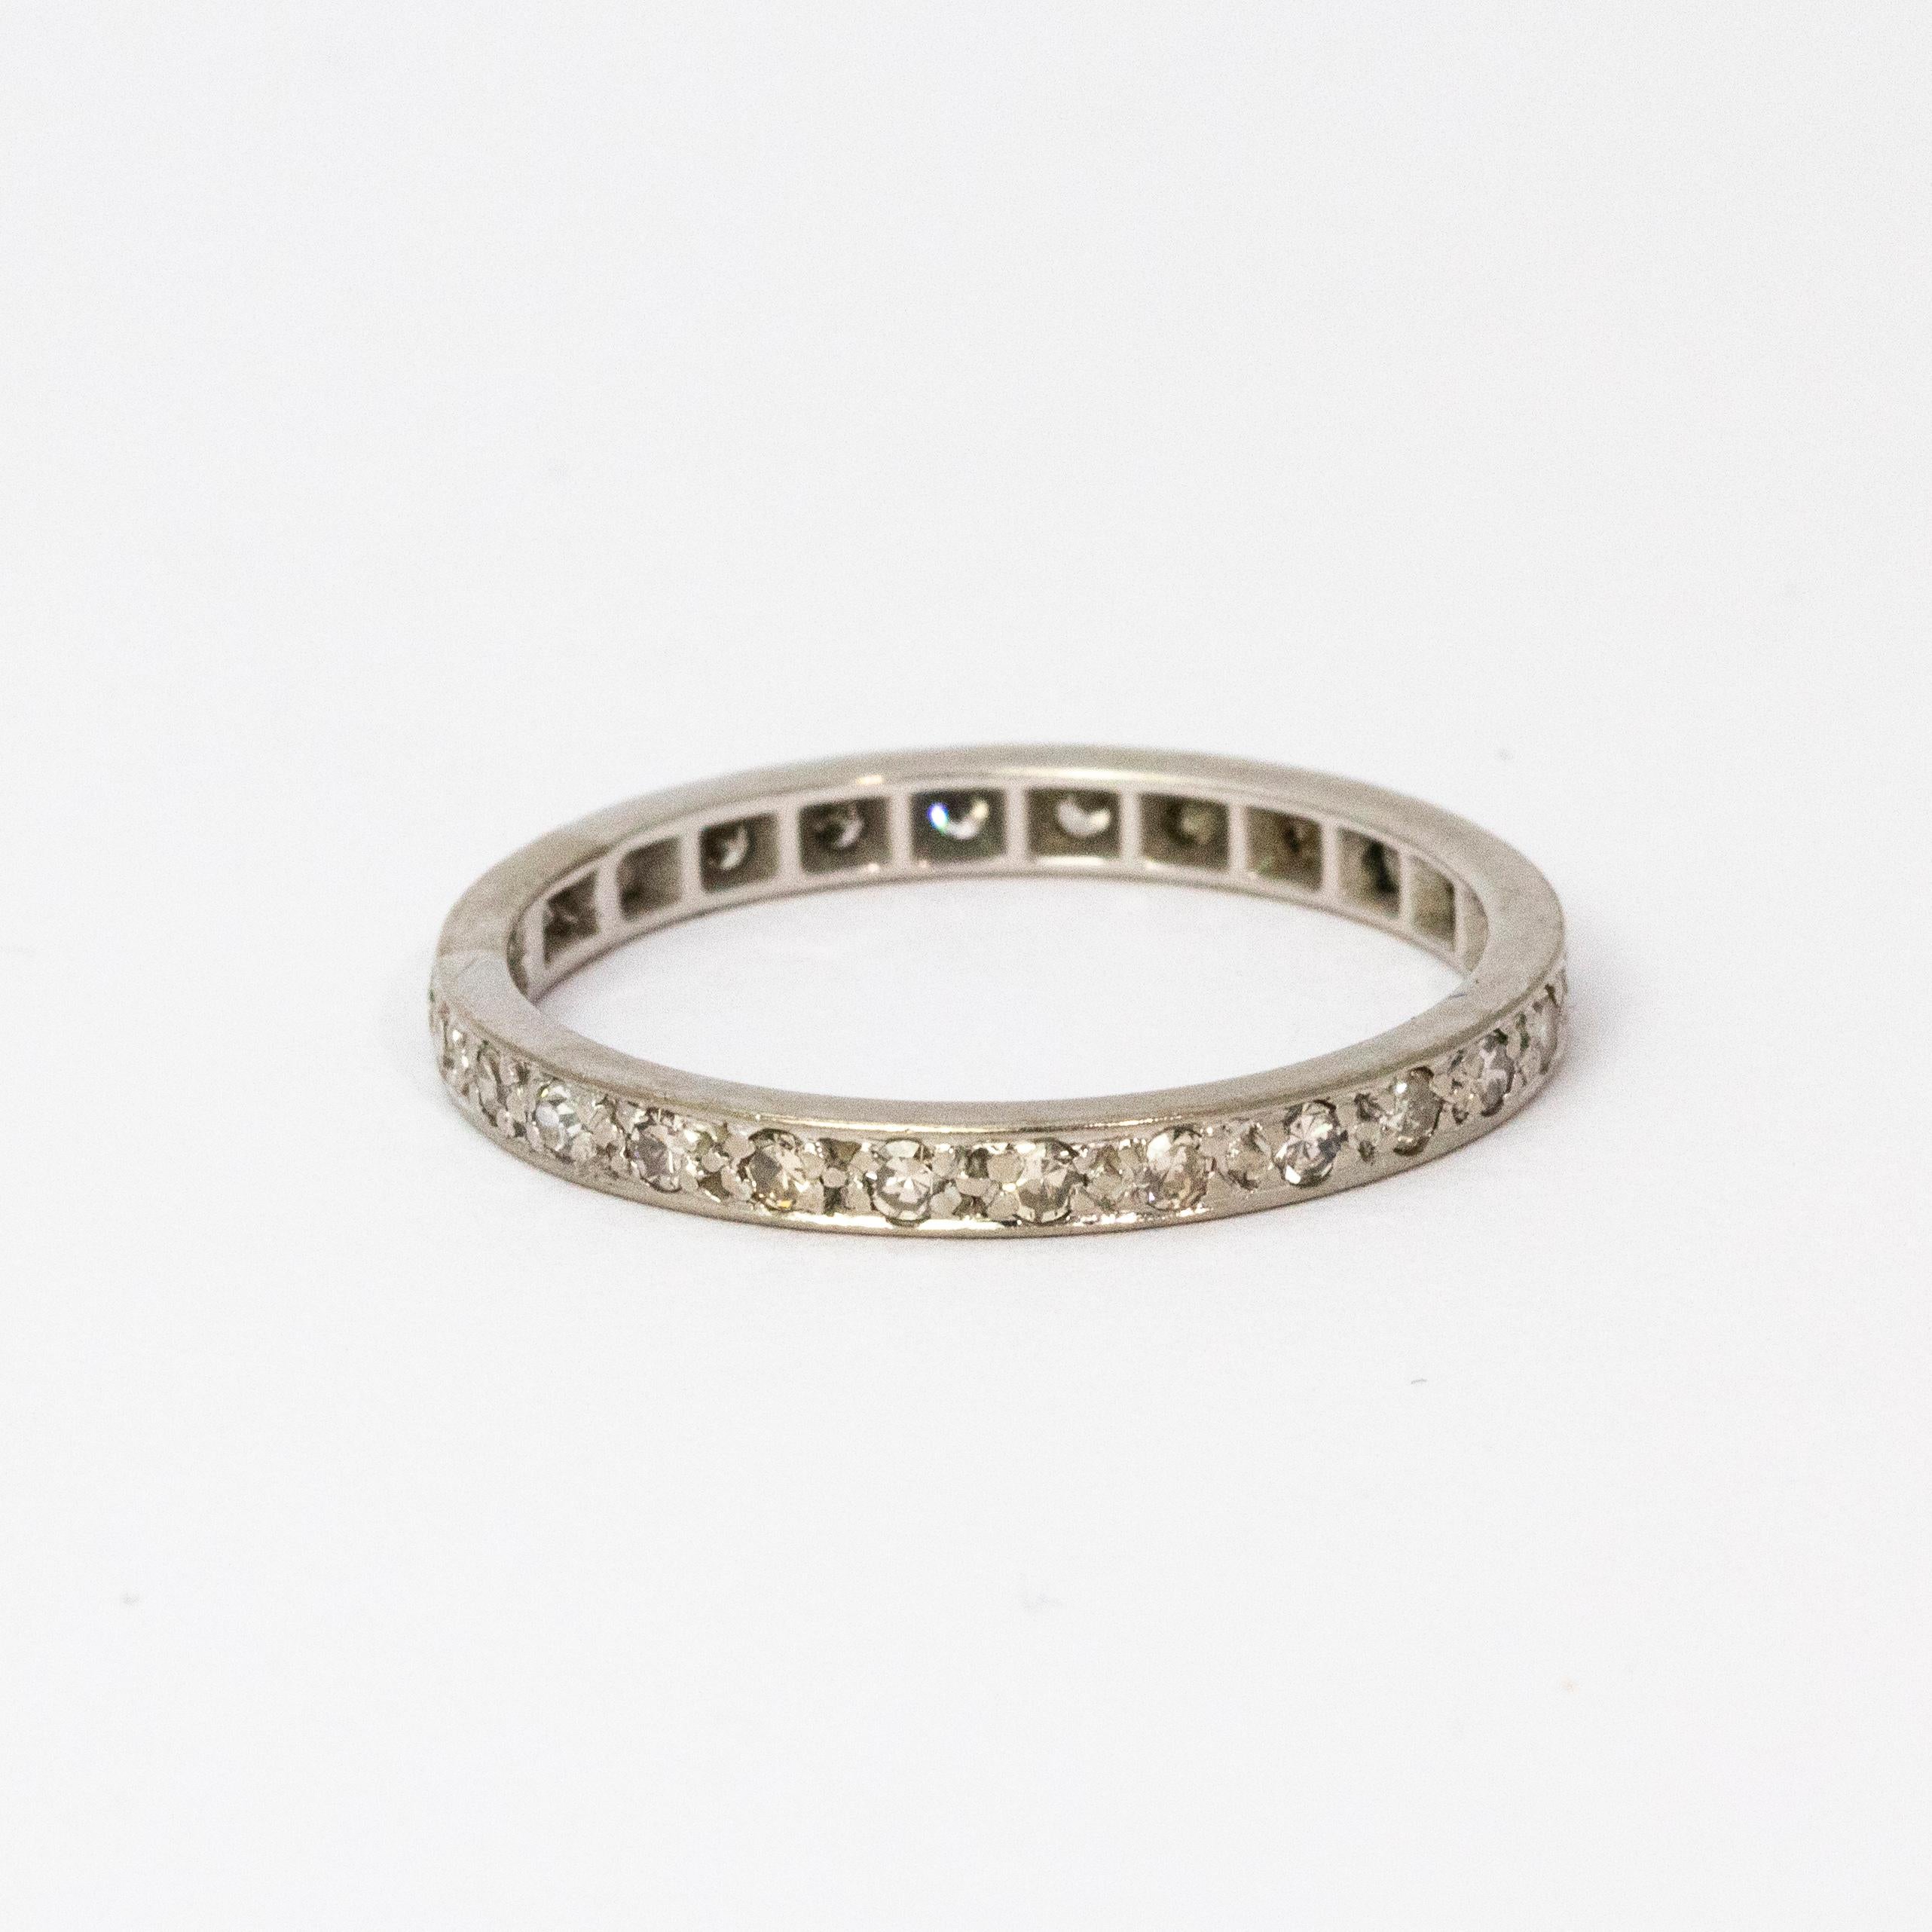 A superb Art Deco full eternity band set with beautiful white diamonds and modelled in platinum.

Ring Size: P 1/2 or 8